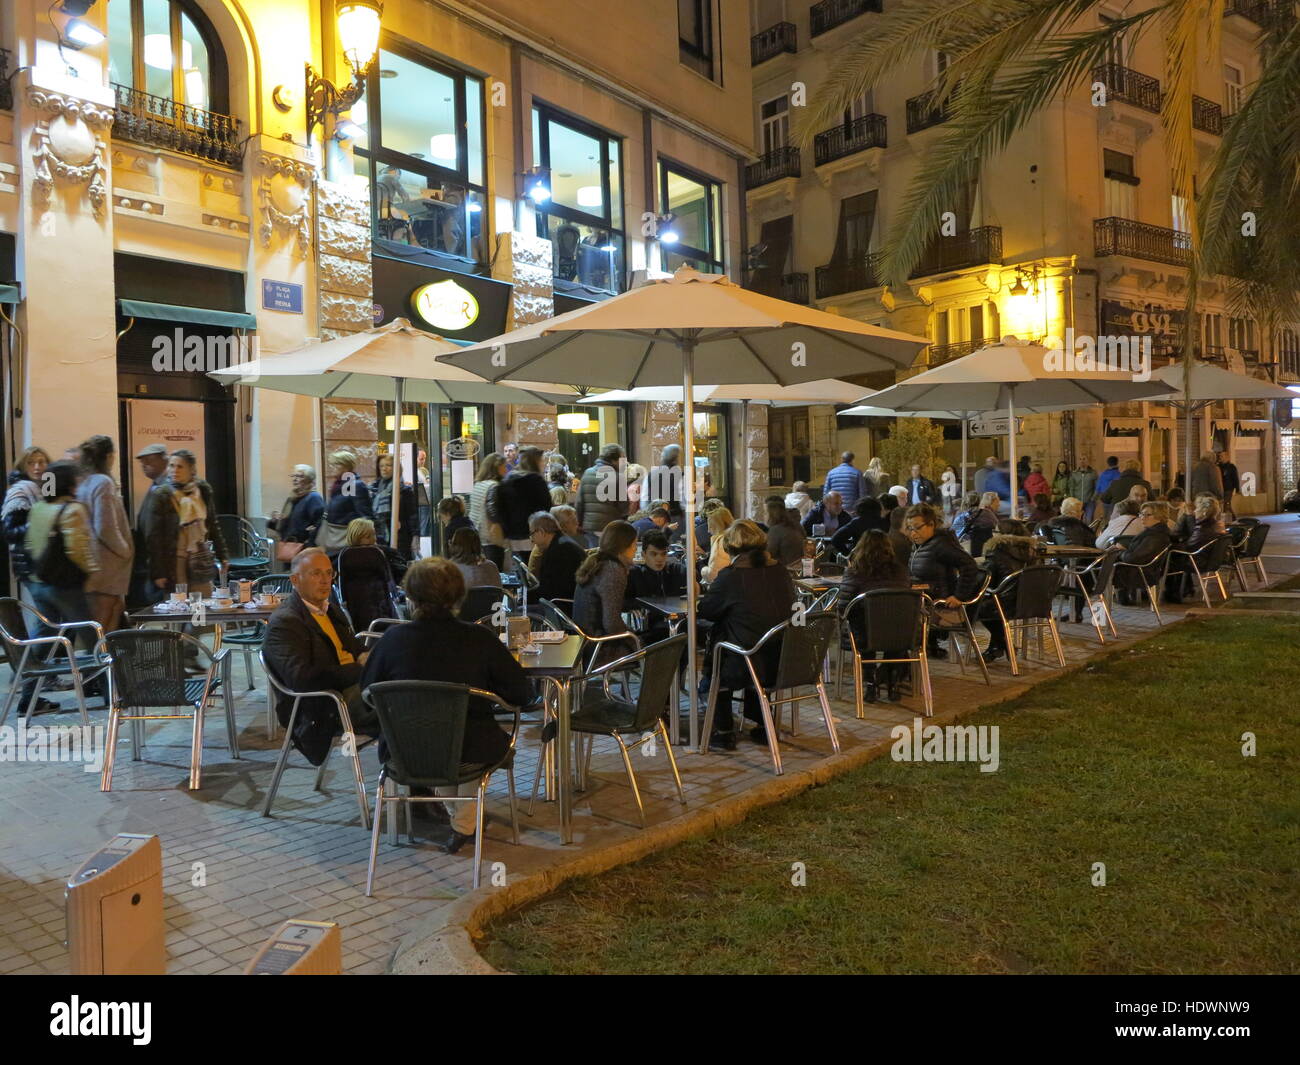 Diners at street cafe in Valencia, Spain Stock Photo